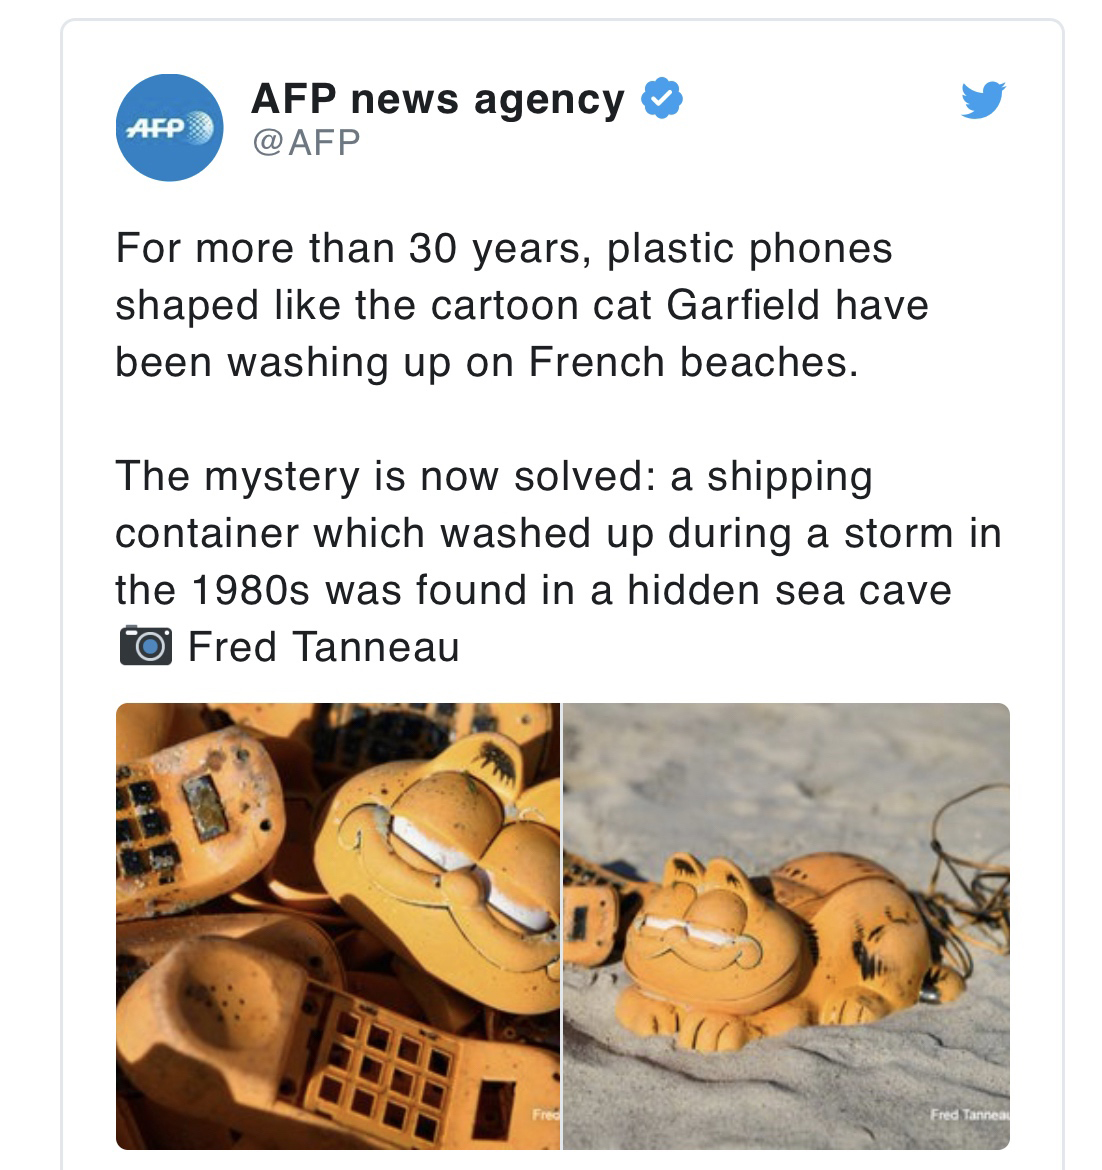 Afp Afp news agency For more than 30 years, plastic phones shaped the cartoon cat Garfield have been washing up on French beaches. The mystery is now solved a shipping container which washed up during a storm in the 1980s was found in a h